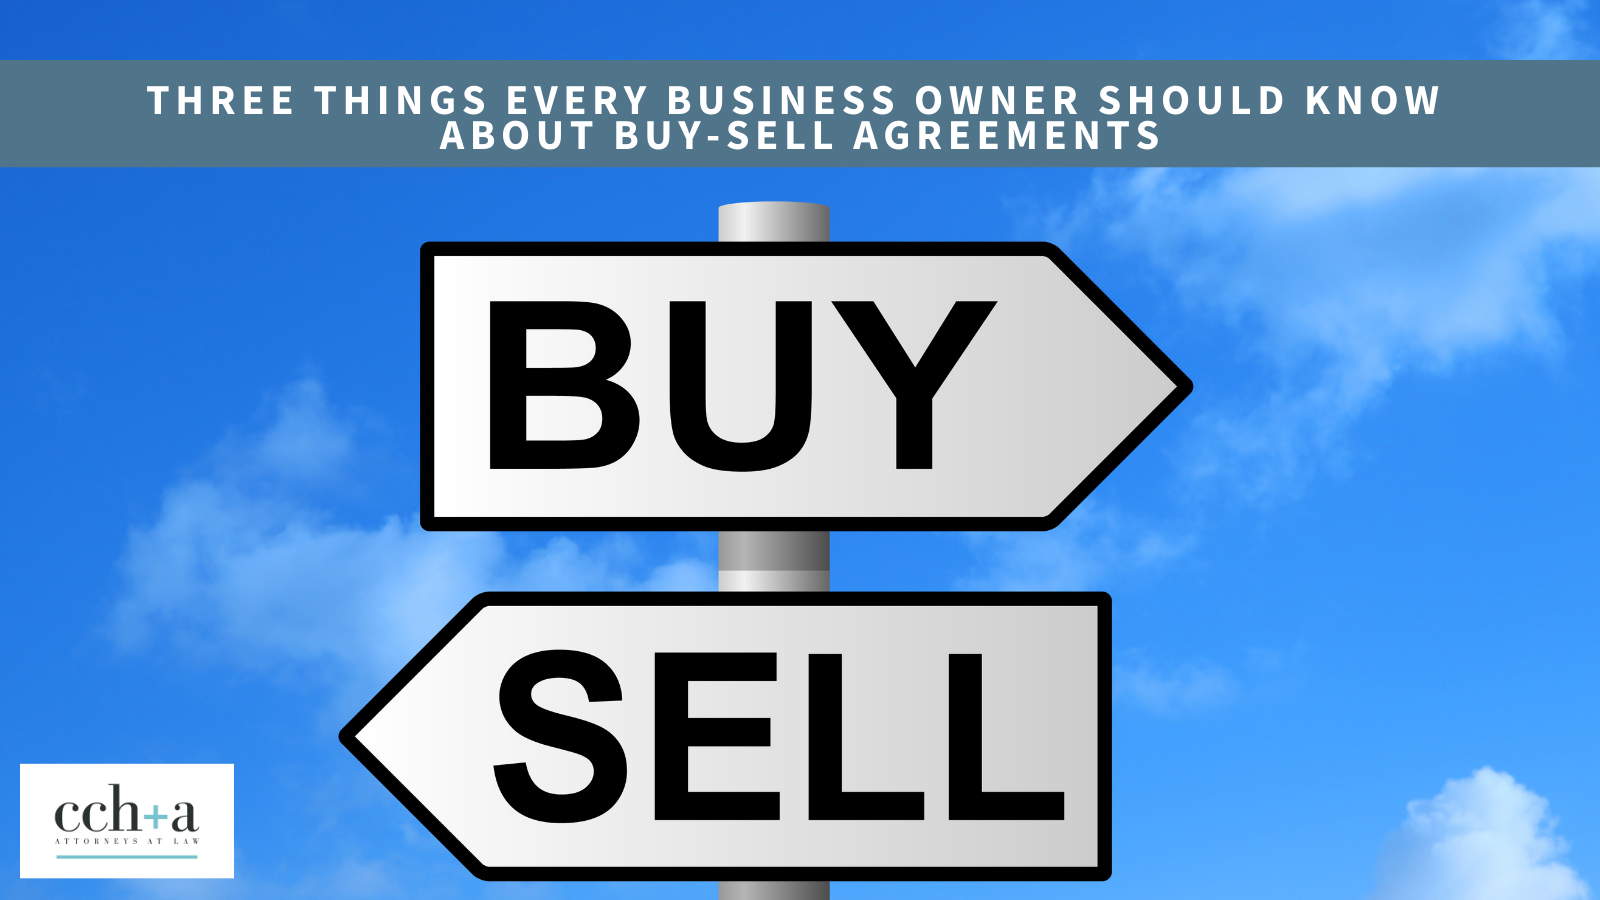 Ccha march 2021 three things to know about buy sell agreements 1